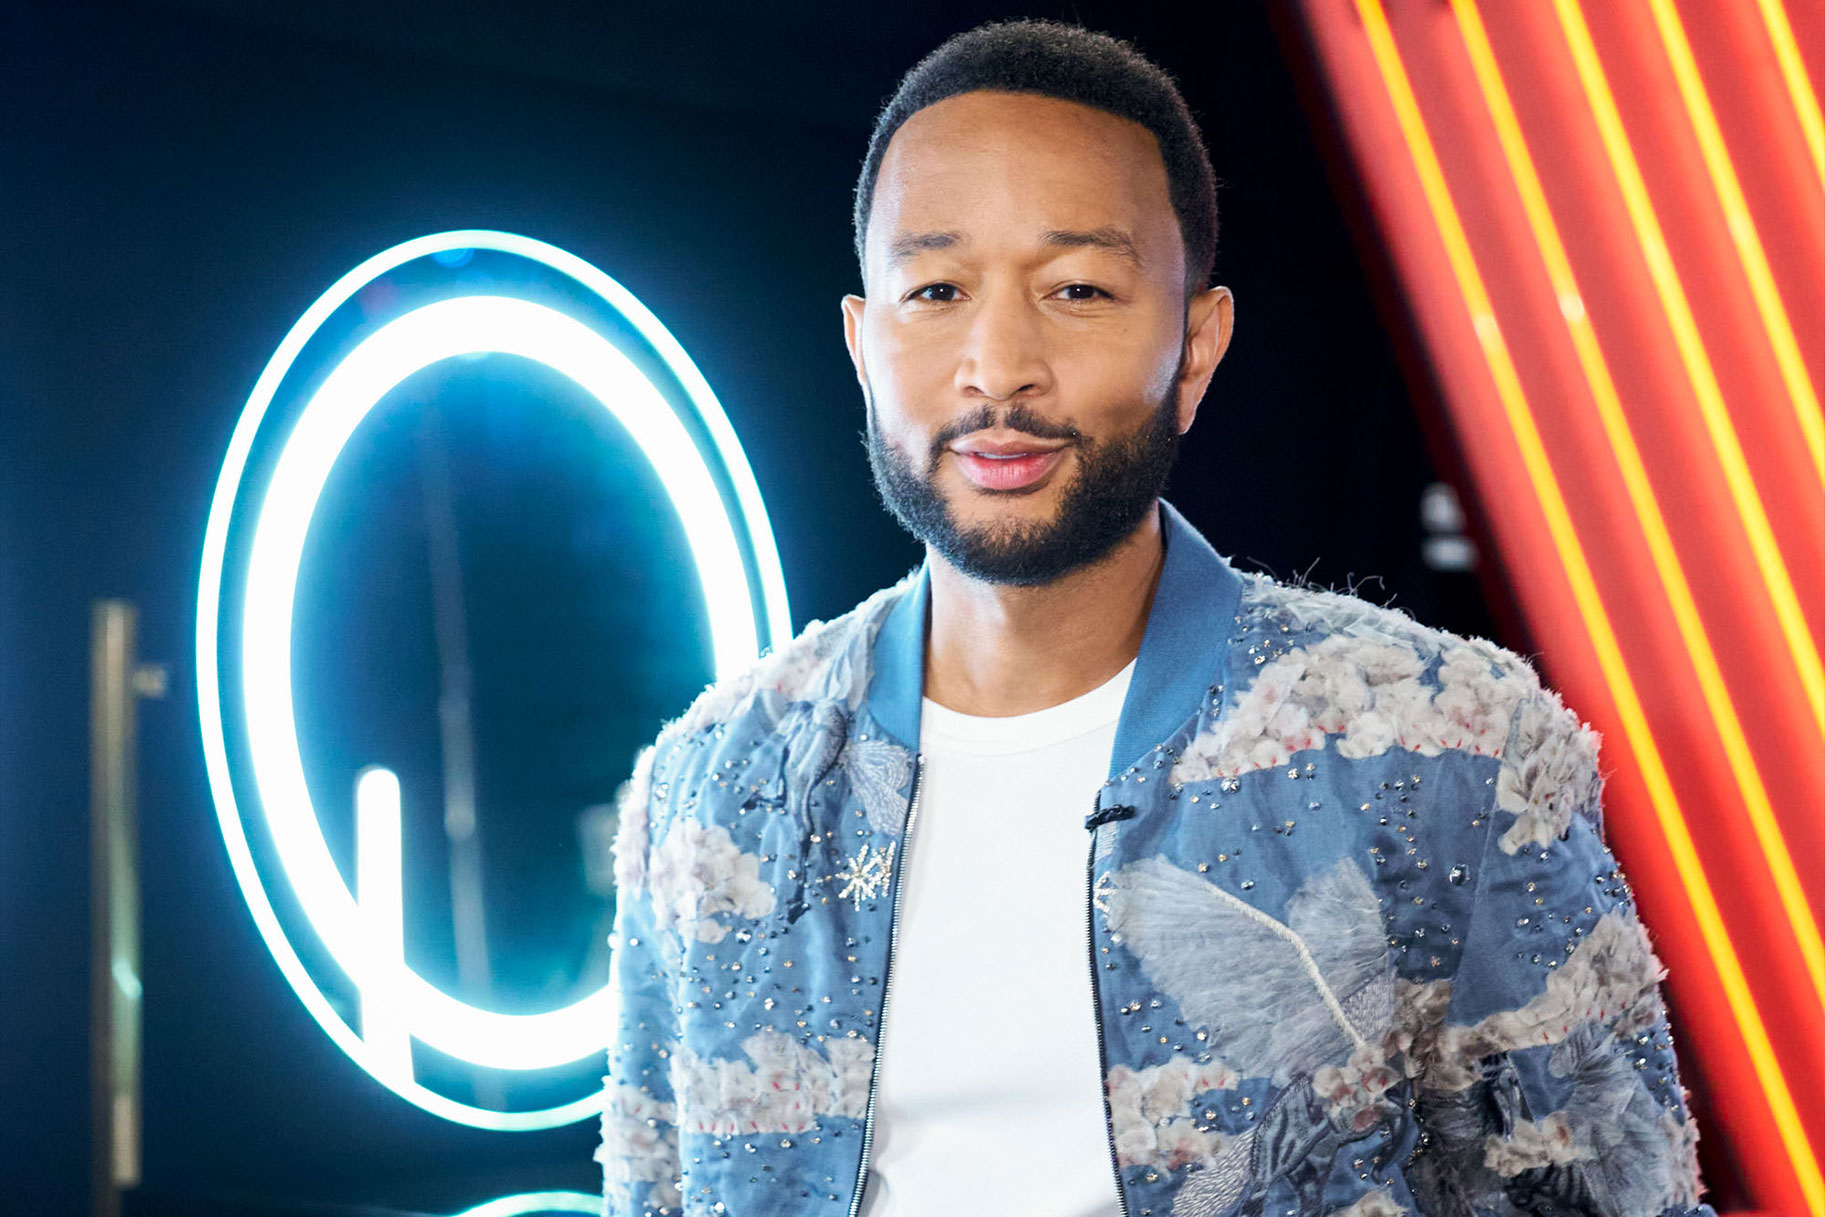 Baby John Legend looks just like his one-year-old son Wren